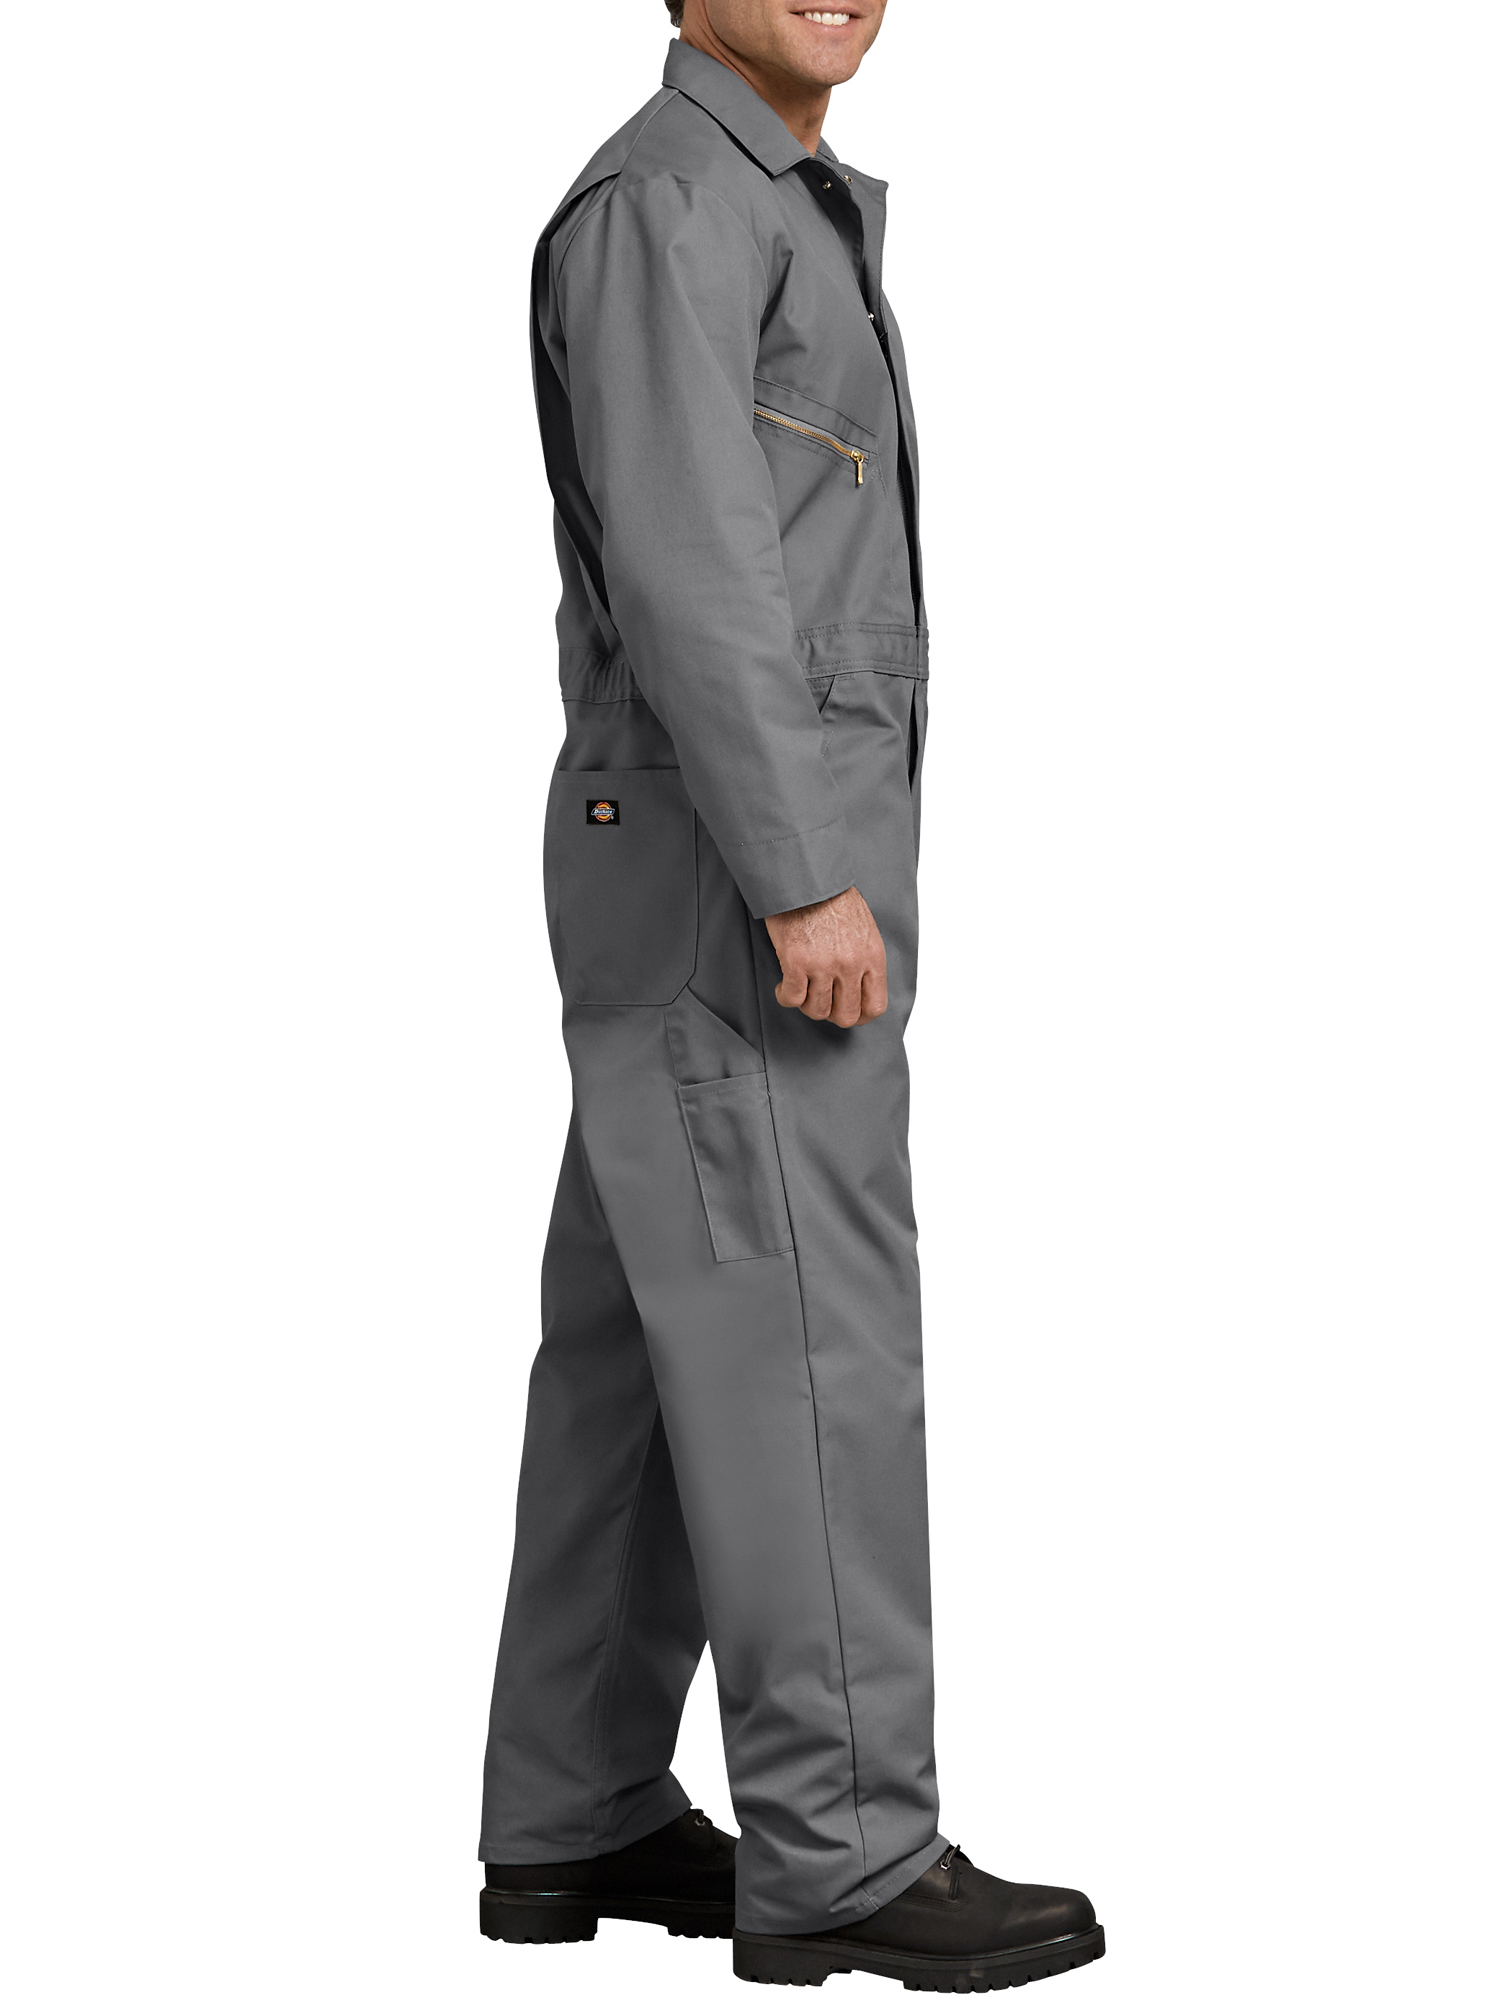 Dickies Mens and Big Mens Deluxe Blended Long Sleeve Coveralls - image 2 of 3